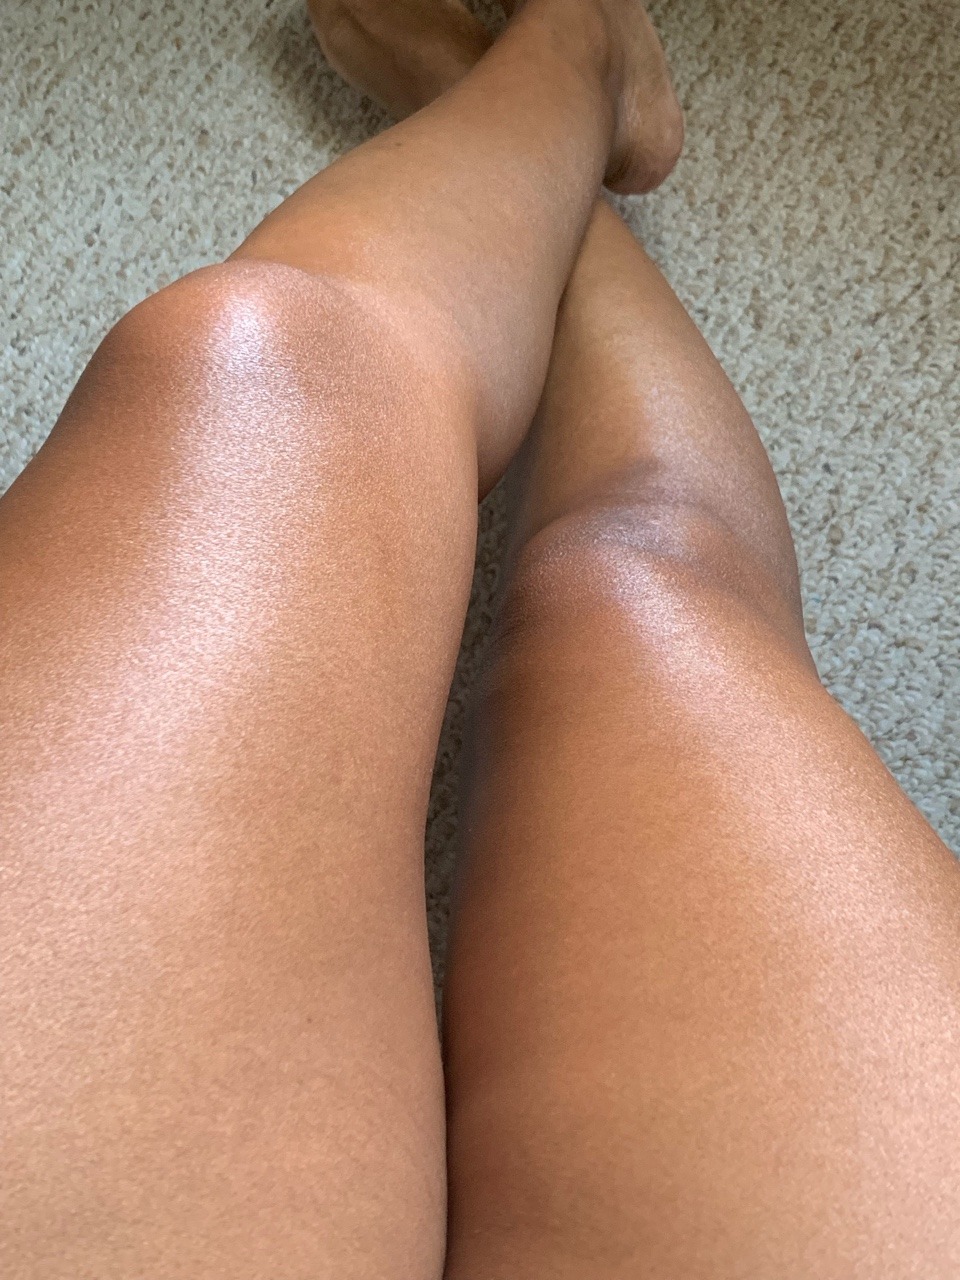 kinkysista6969:  THICK THIGHS THURSDAY☺️  #juicy #thick #plump #heavenly #desirable